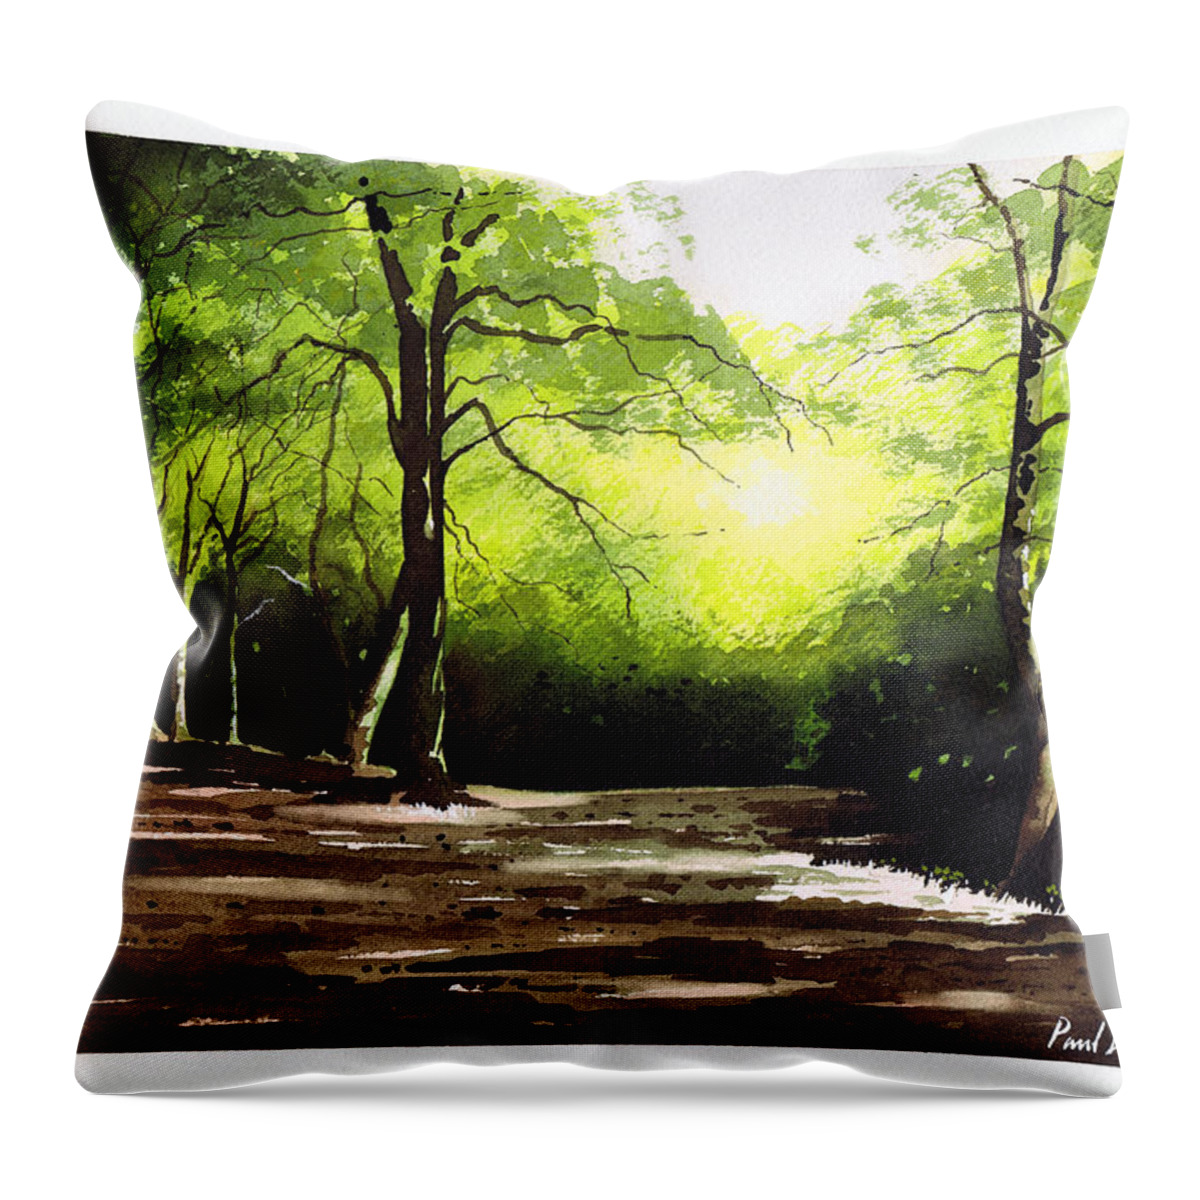 Judy Woods Throw Pillow featuring the painting Judy Woods by Paul Dene Marlor